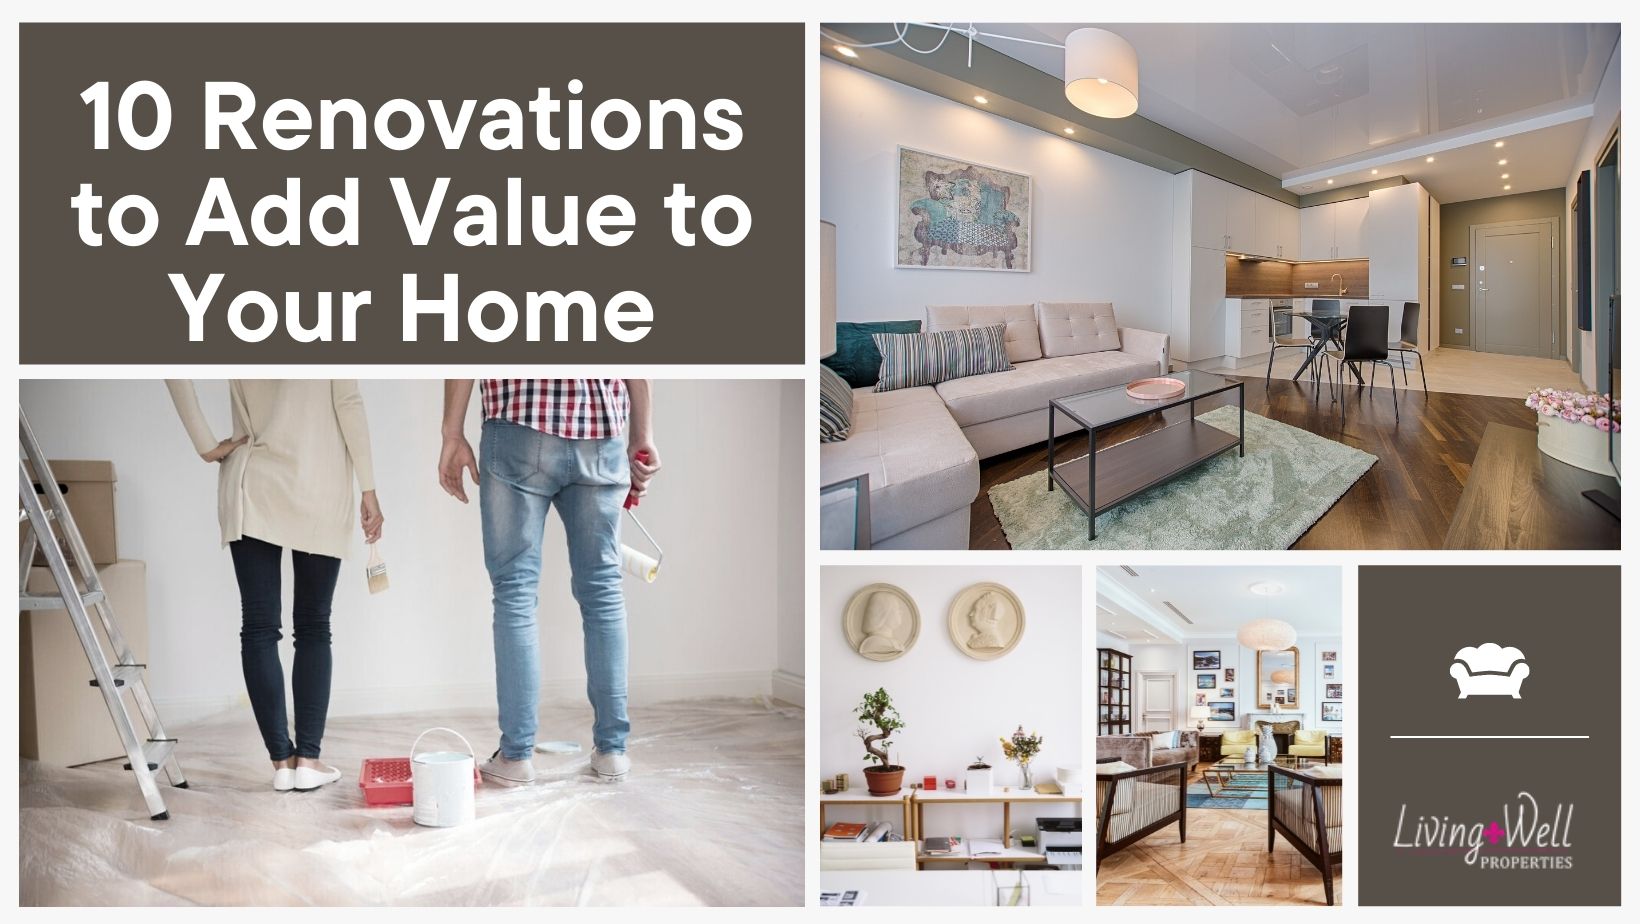 10 Renovations to Add Value to Your Home